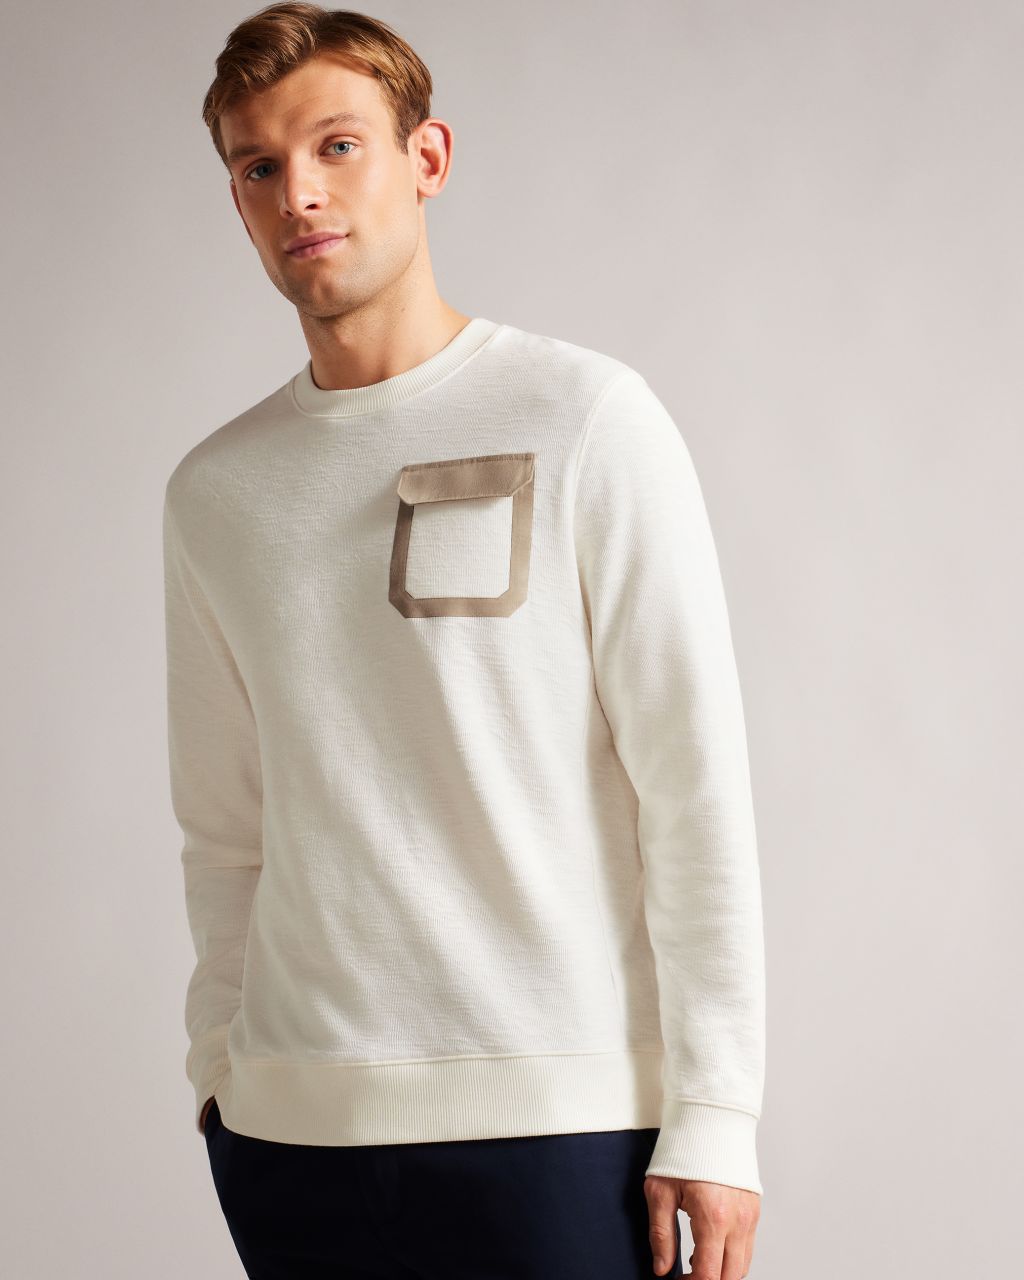 Ted Baker Men's Long Sleeve Relaxed Sweatshirt In White, Escana, Cotton